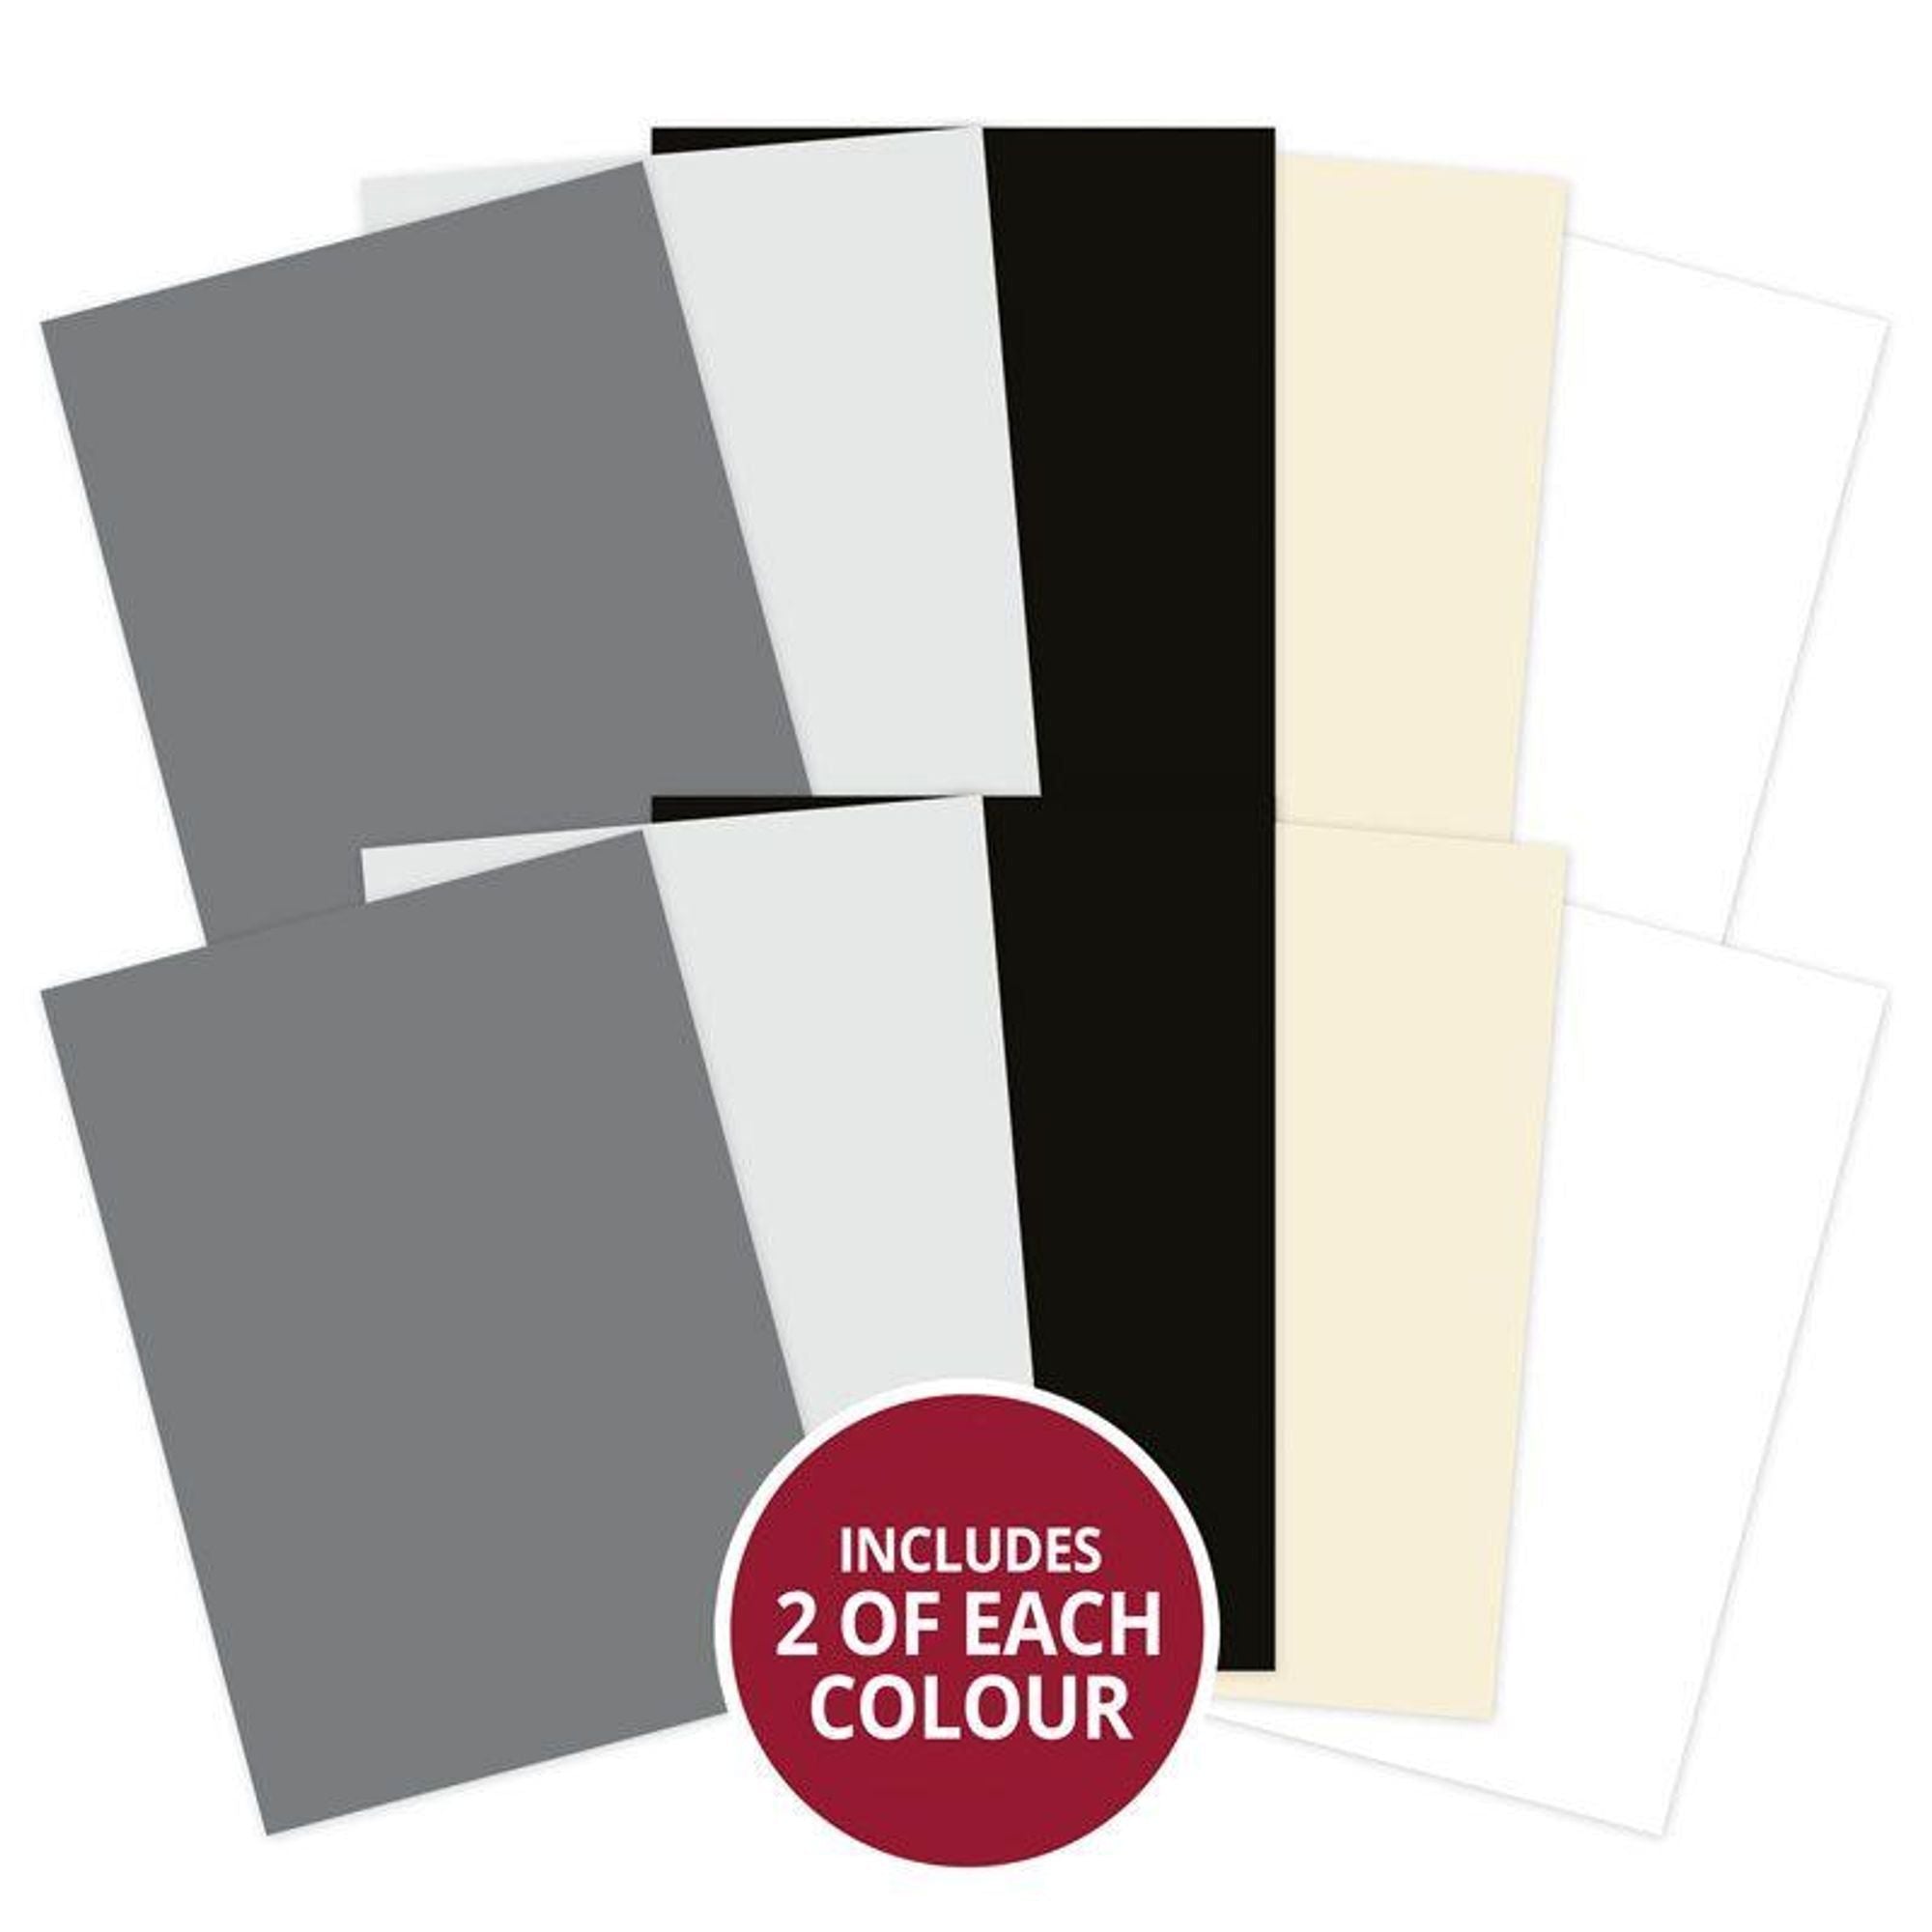 Adorable Scorable A4 Cardstock x 10 sheets - Monochrome Shades